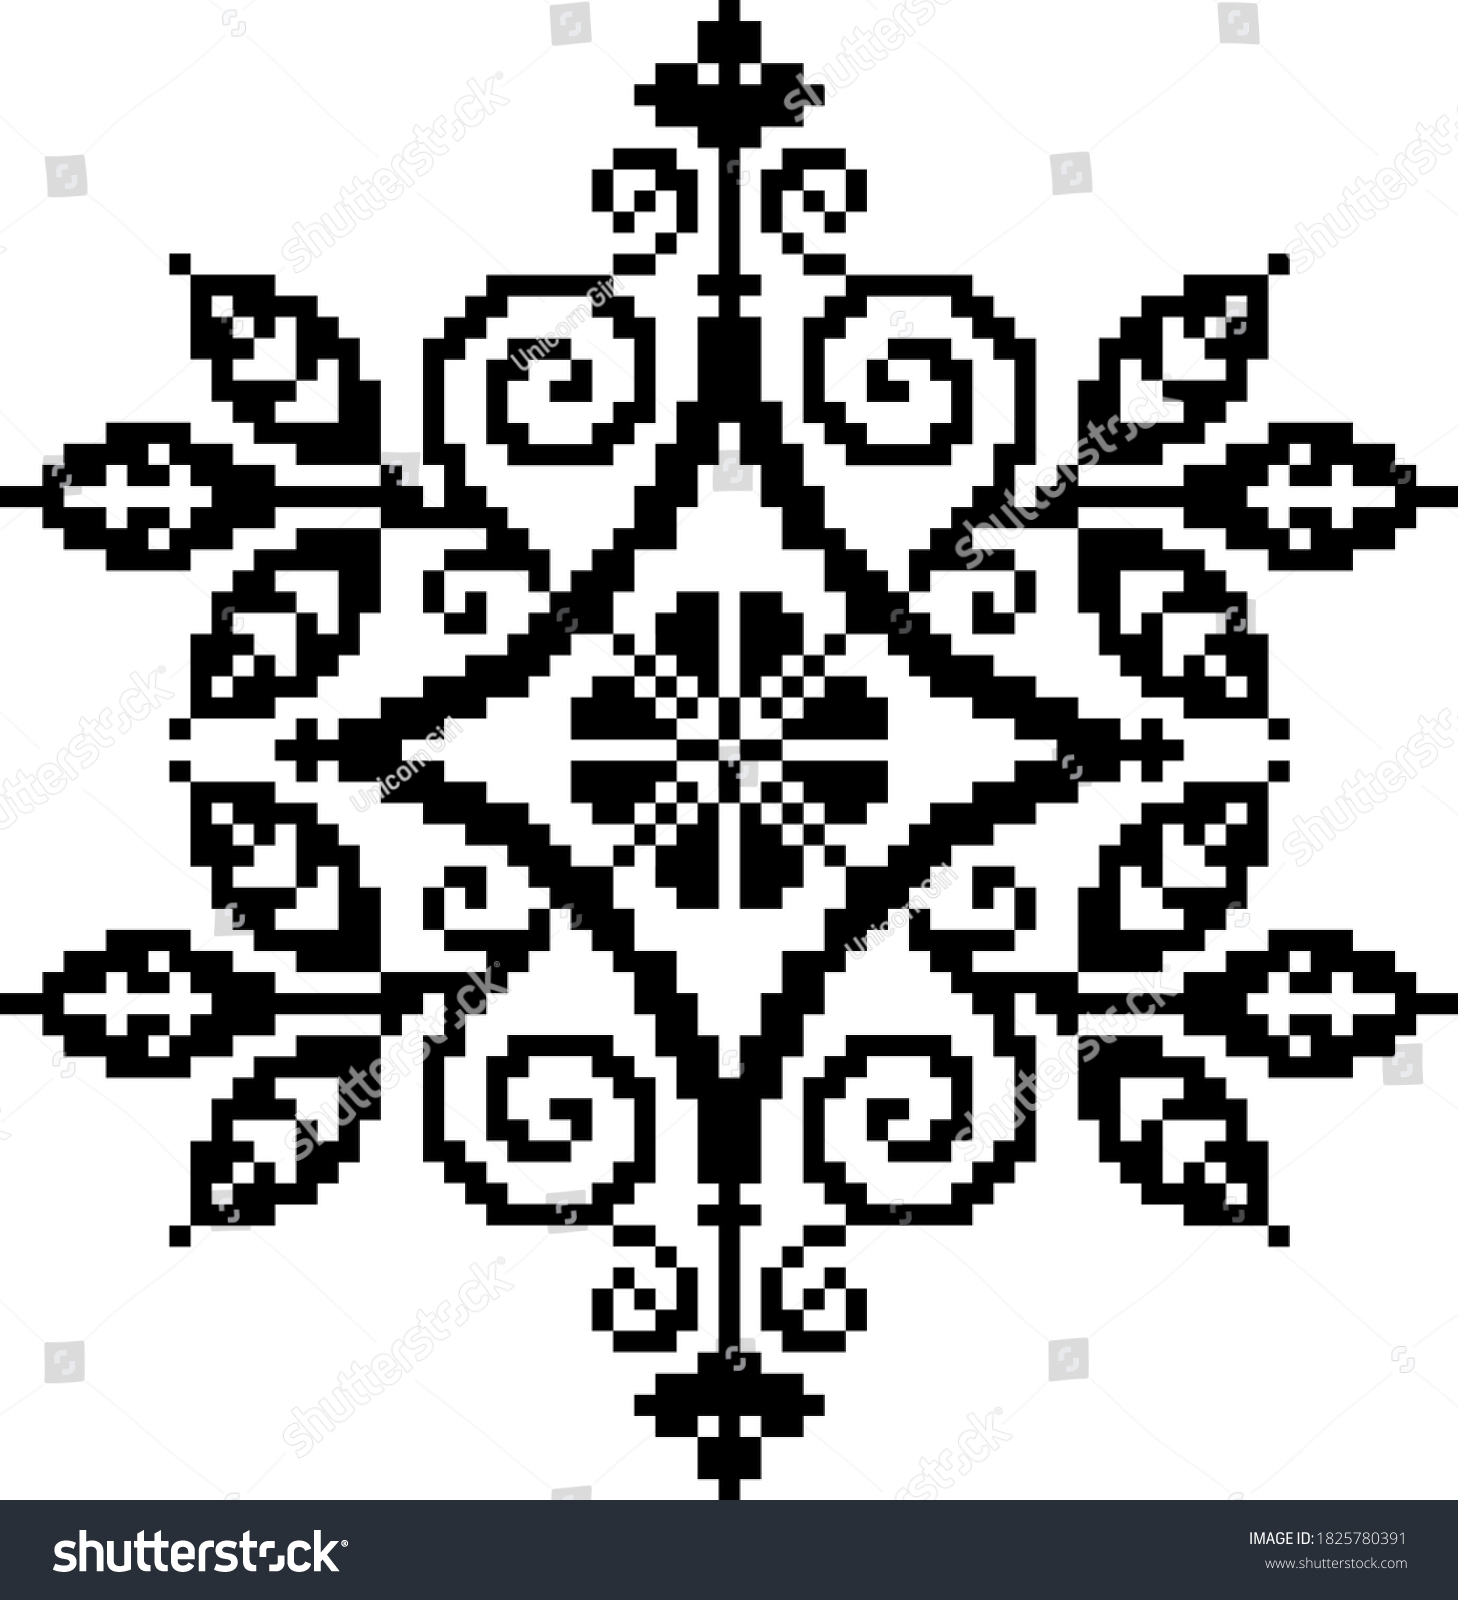 SVG of Scheme for embroidery flowers with leaves inscribed in a diamond in black svg